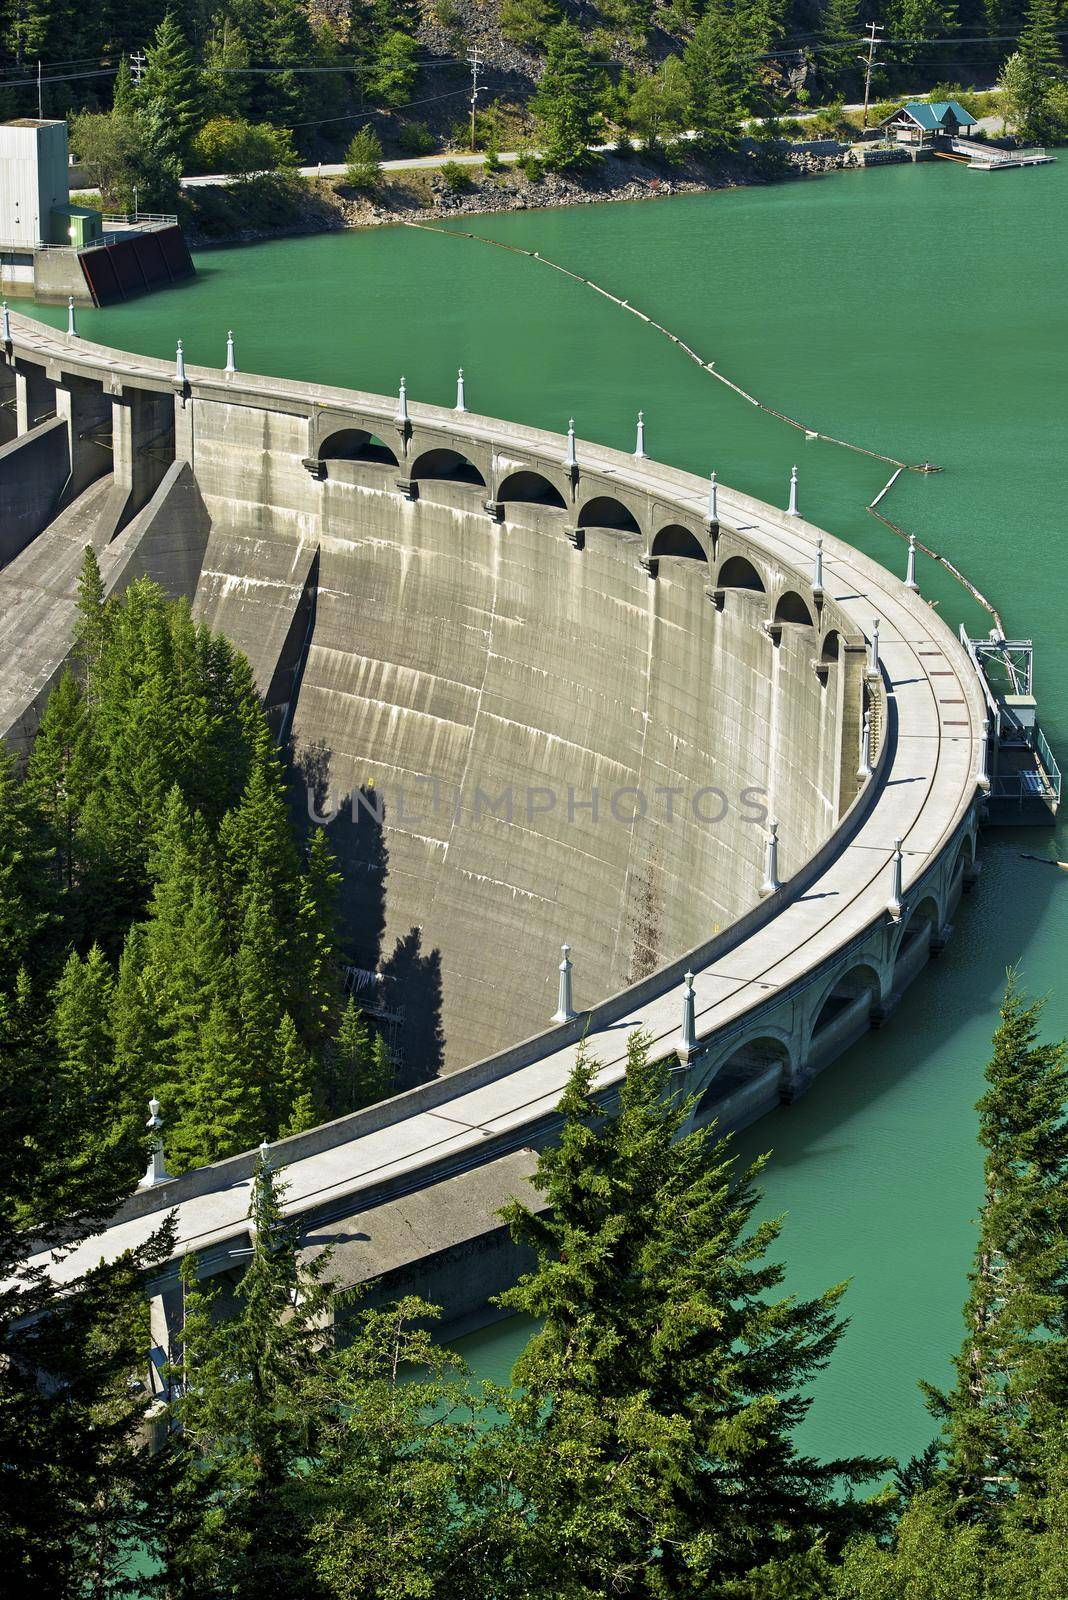 Diablo Dam at Diablo Lake - North Cascades National Park, State of Washington, USA. Nature Power Sources Theme. Green Energy Photo Collection. by welcomia